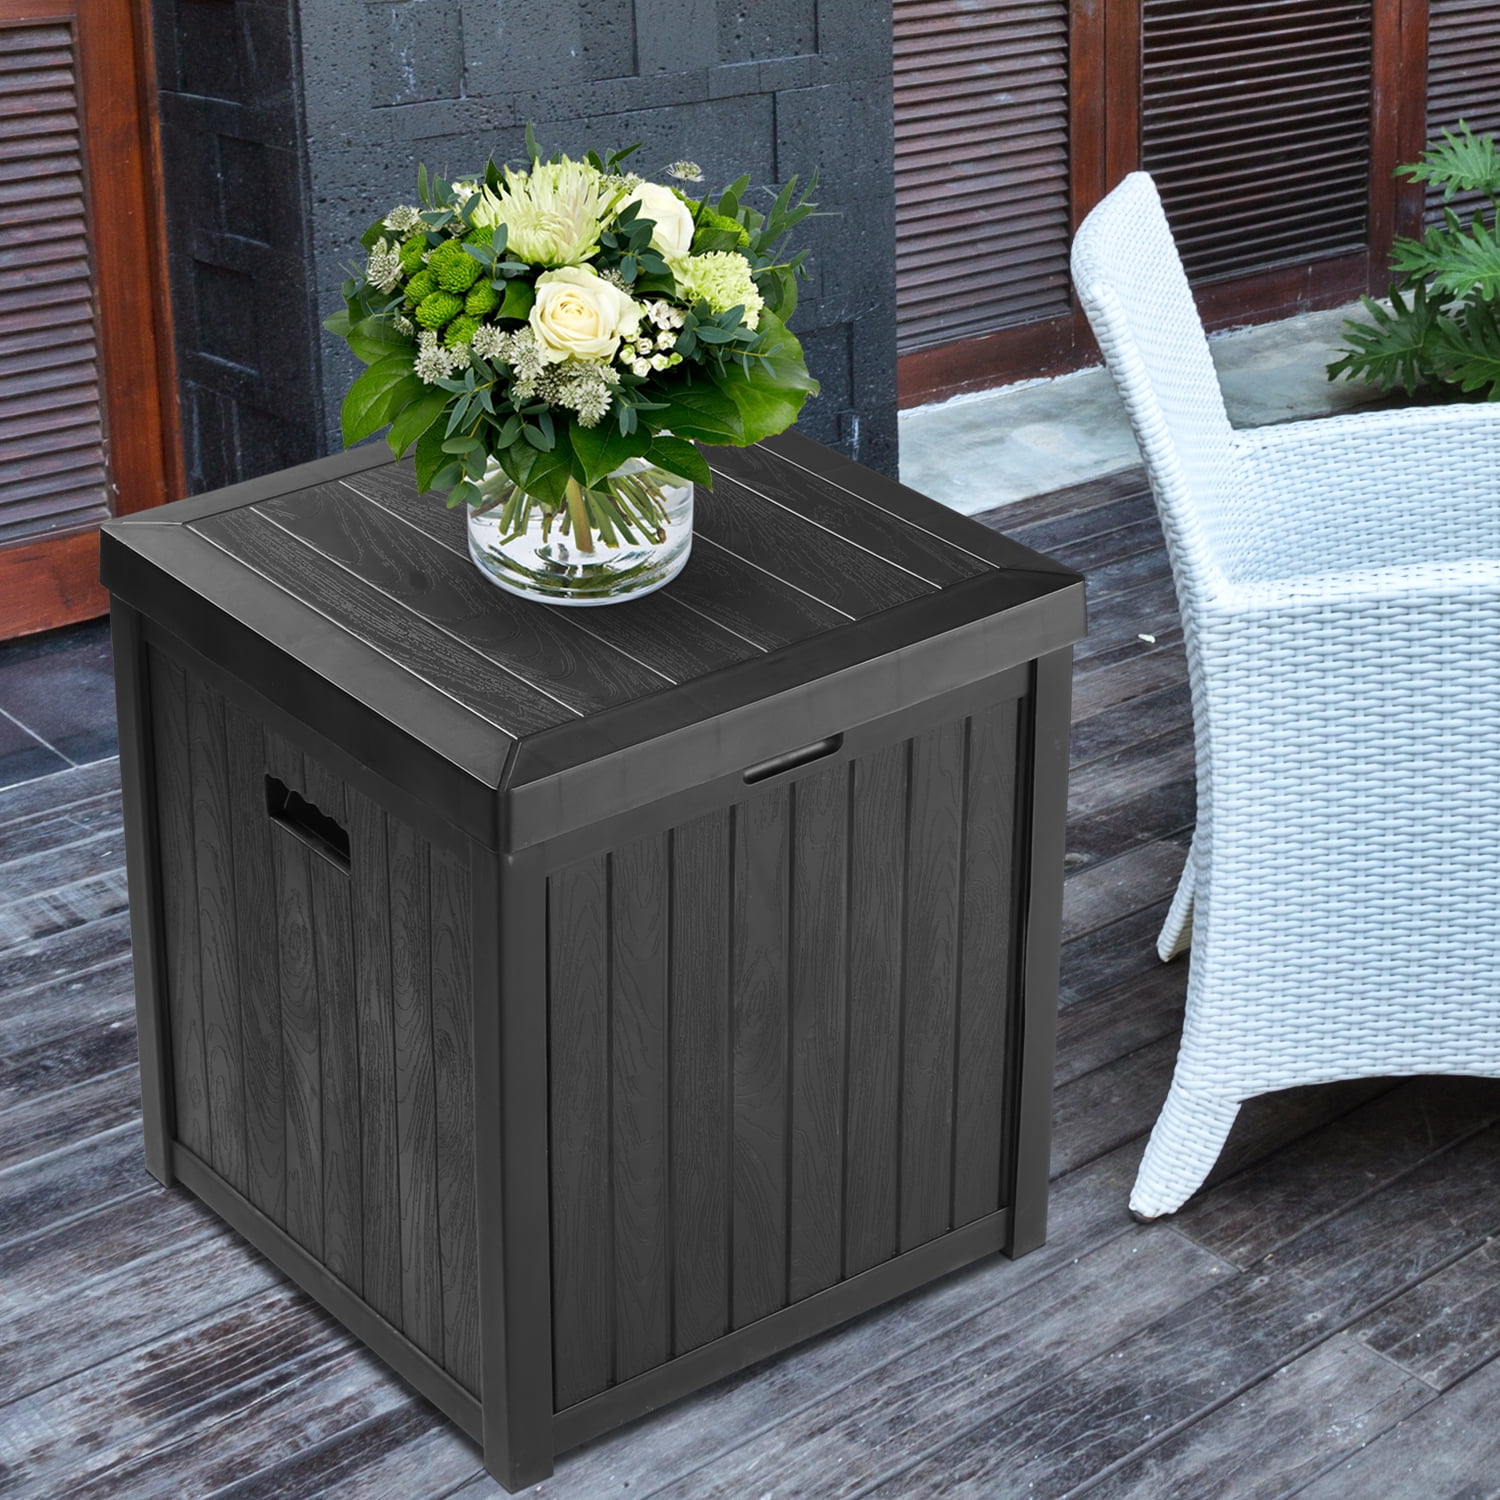 Ainfox Patio Storage Deck Box Carbon Black All Weather Resin Wicker Deck Box Storage Container Bench Seat Outdoor Storage Plastic Bench Box 